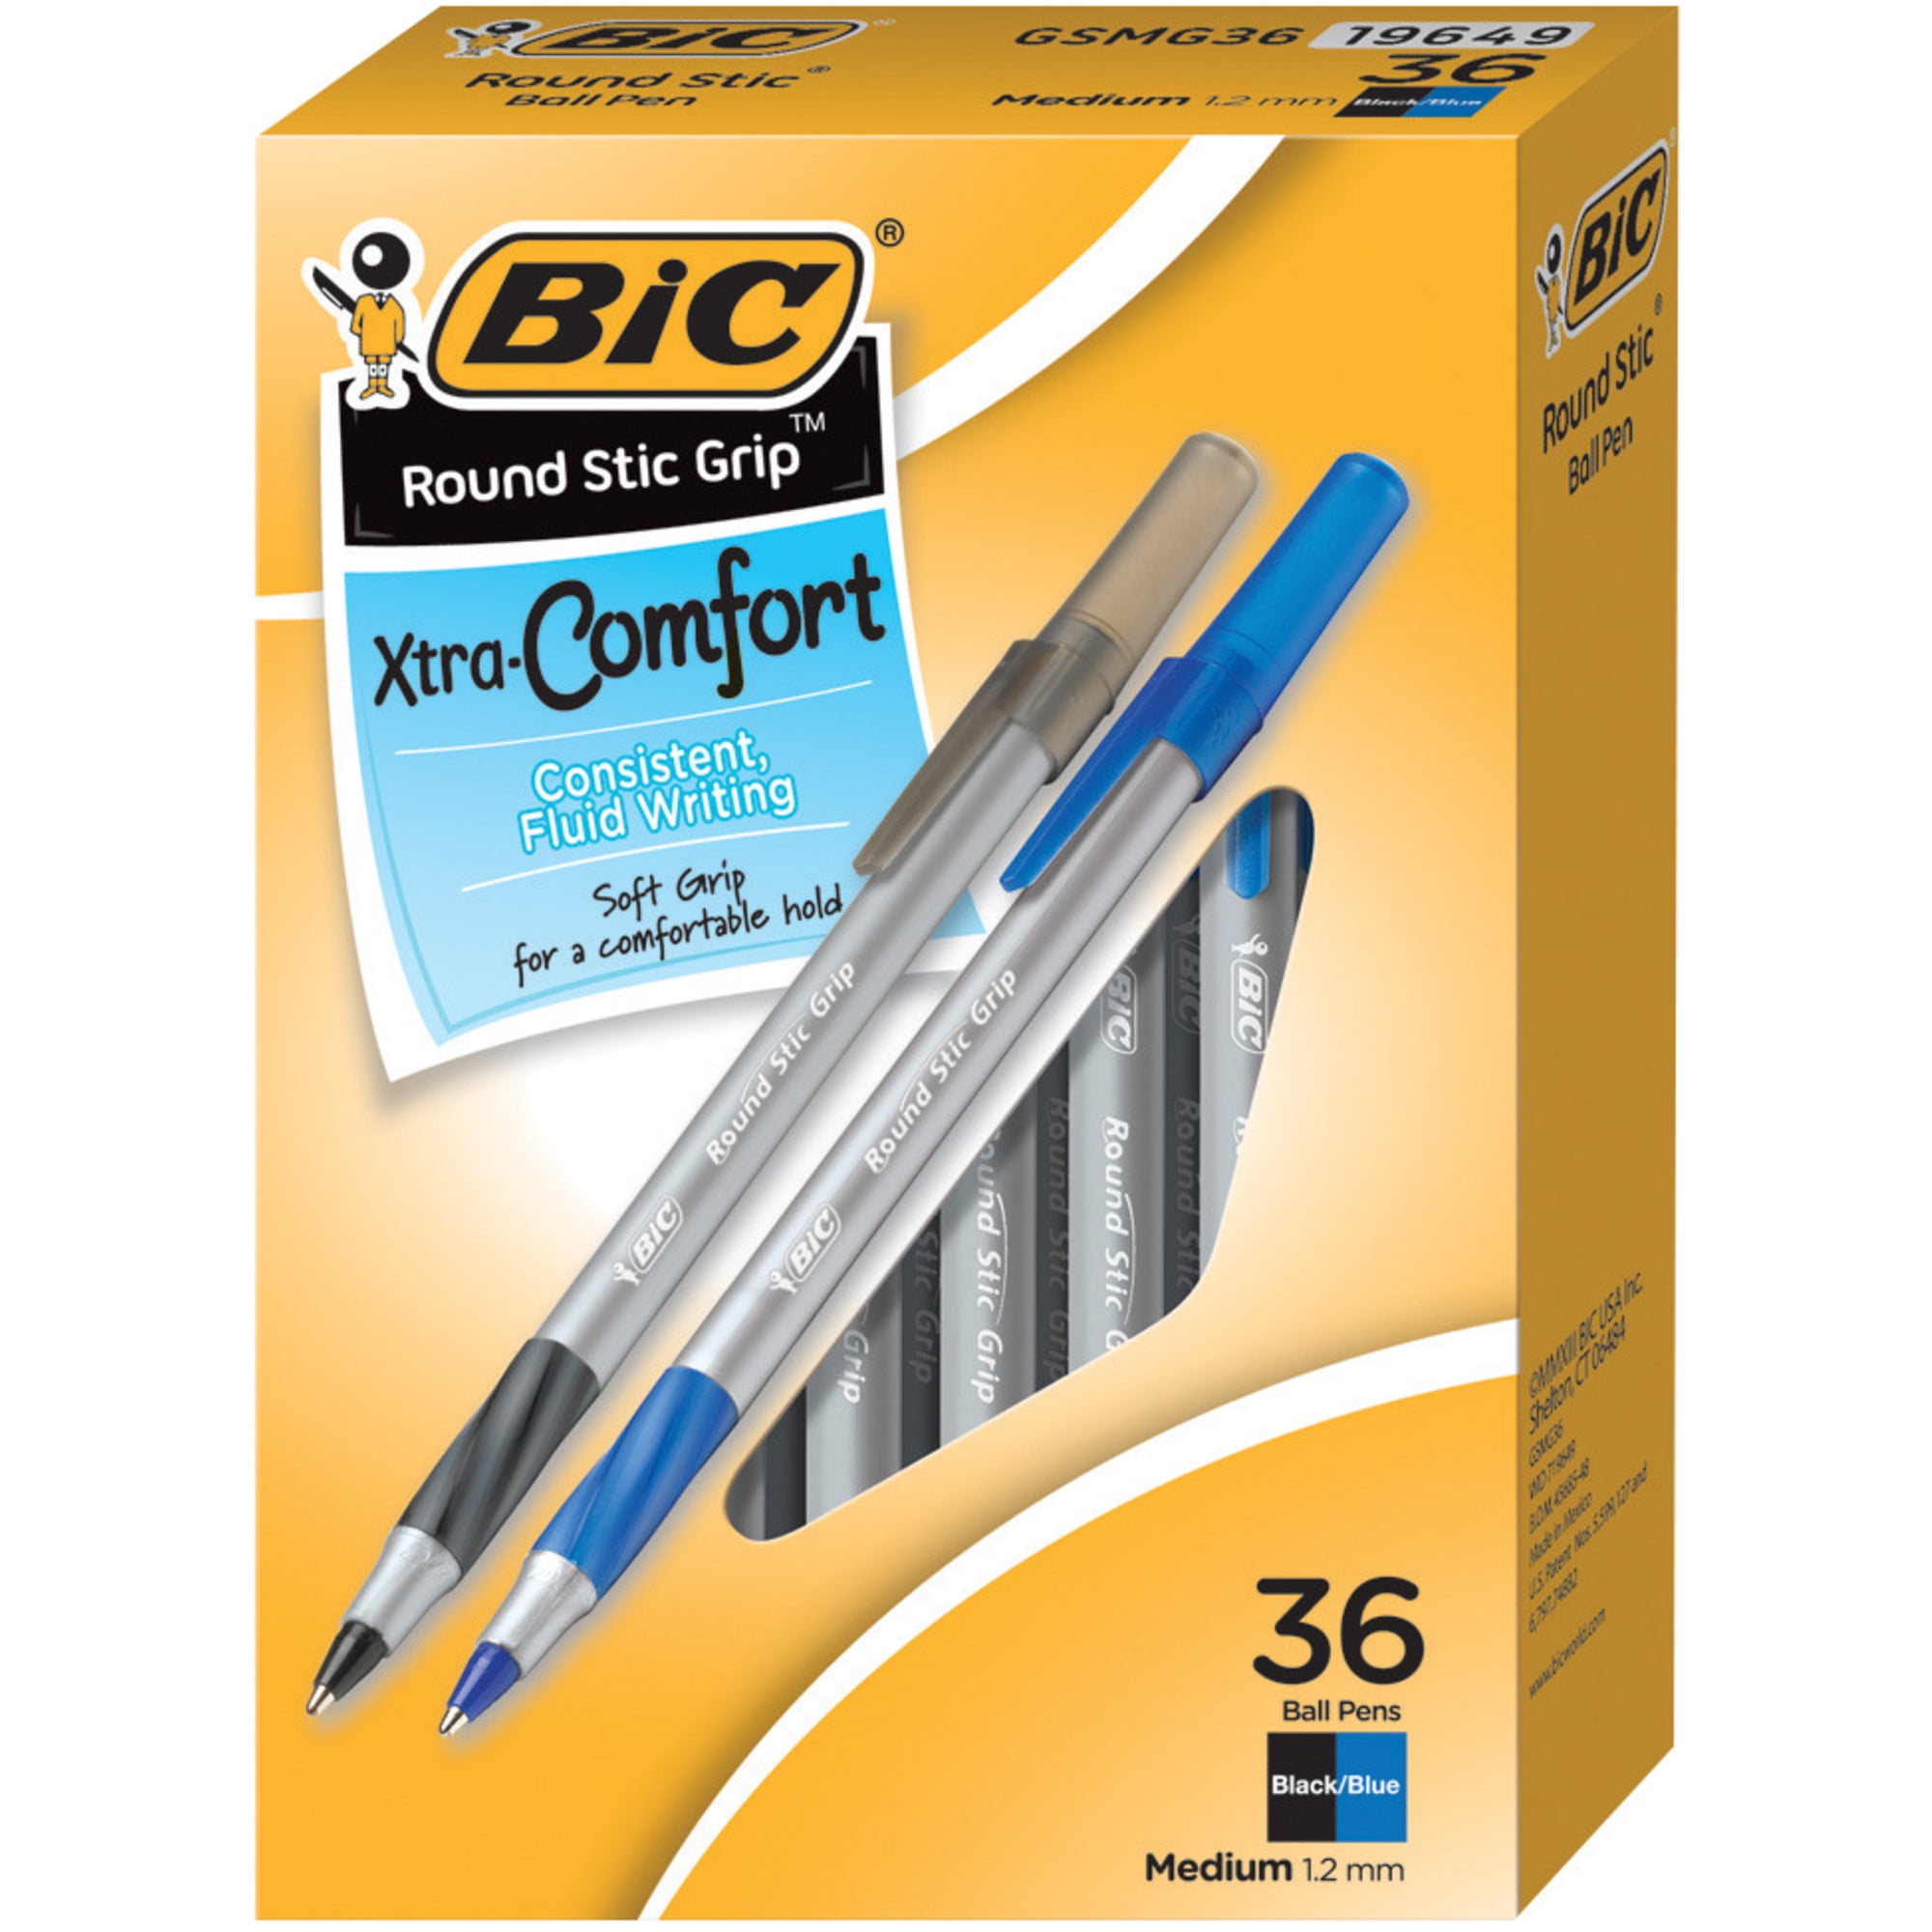 Making the best Bic possible? : r/pens